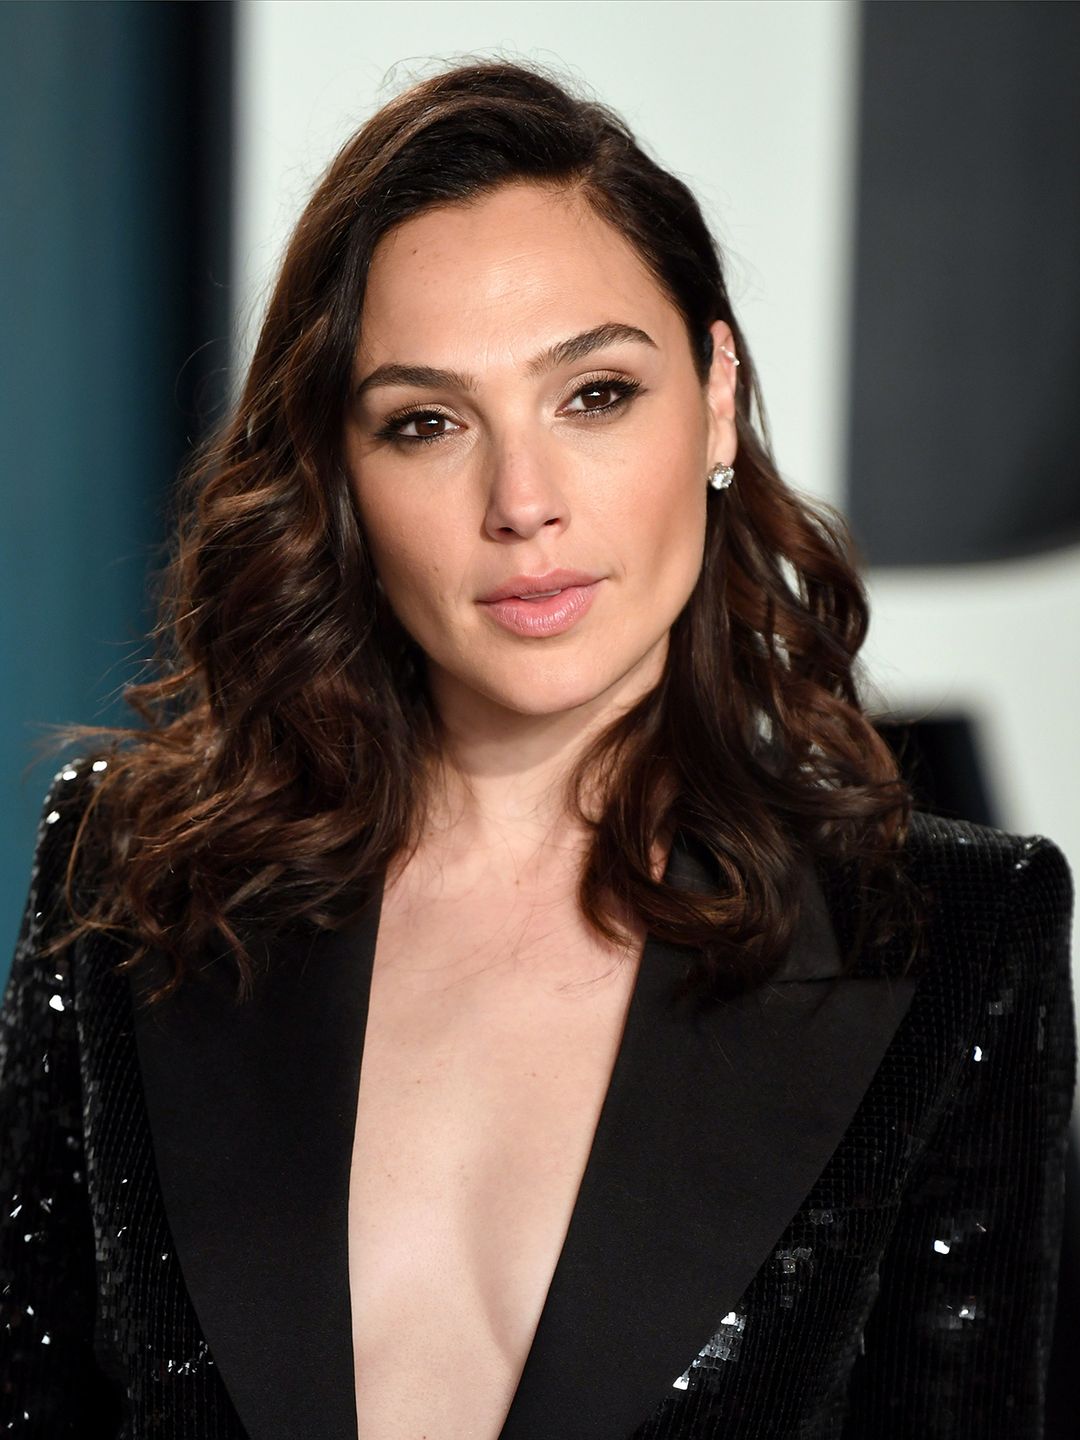 Gal Gadot who are her parents